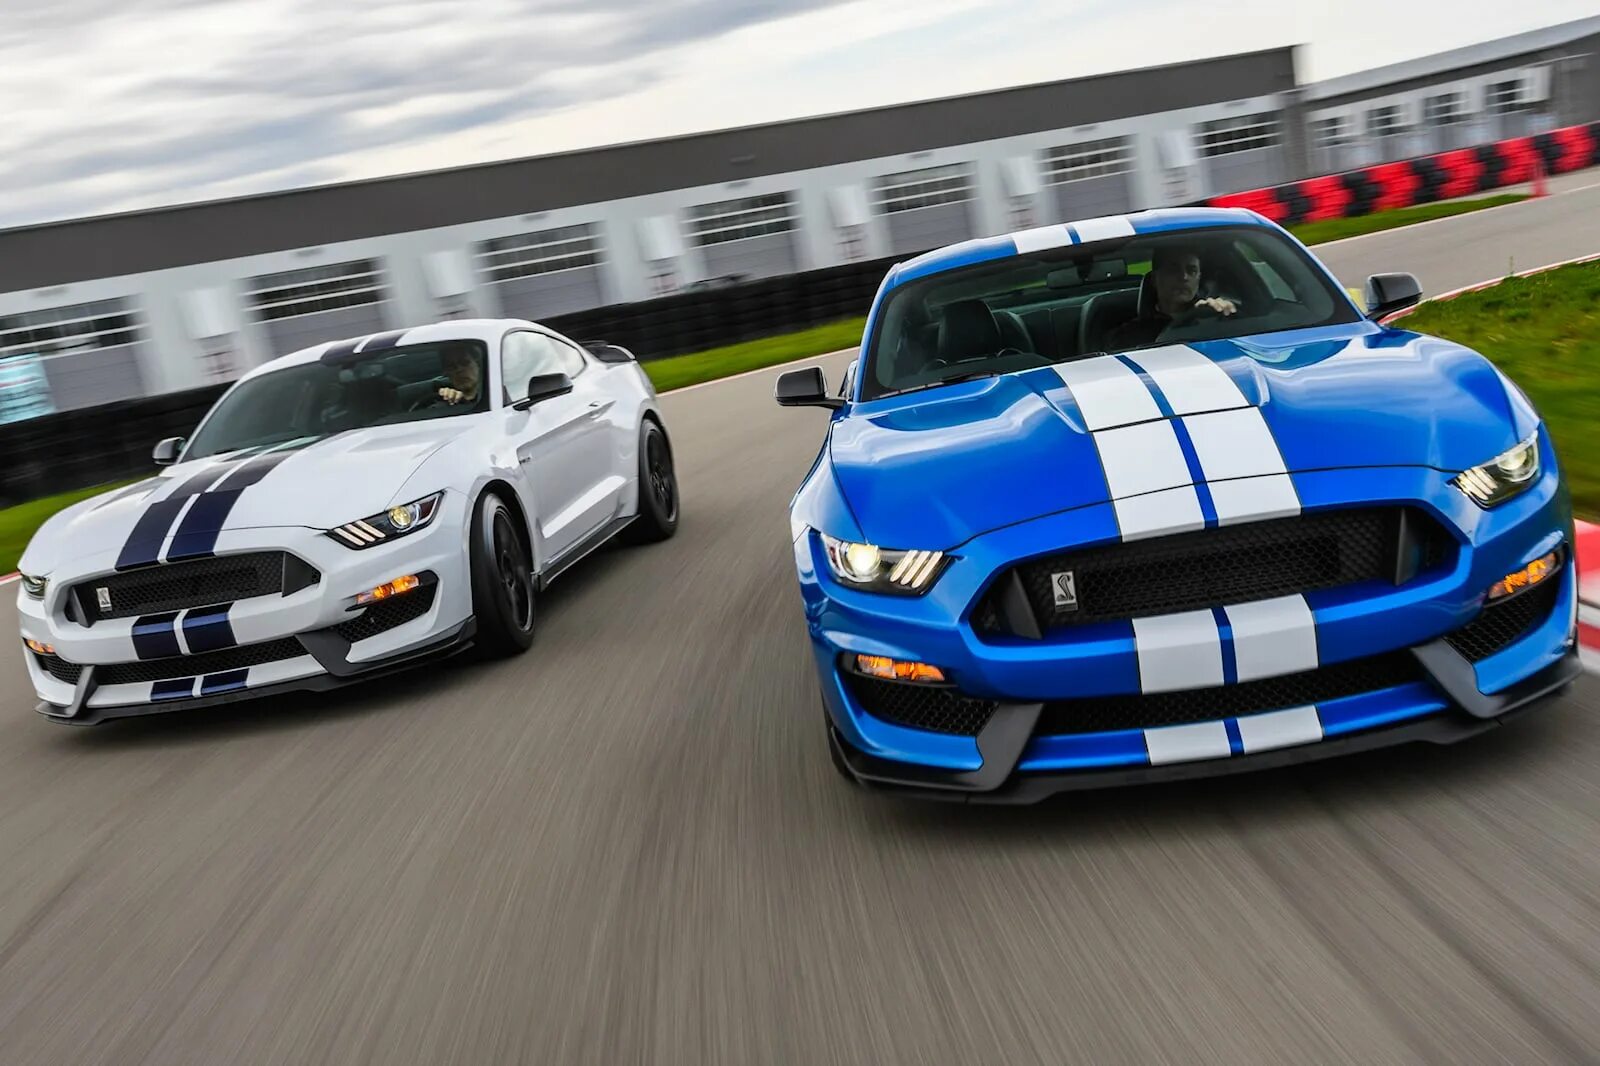 Ford Shelby gt350r. Ford Mustang Shelby gt350. Форд Мустанг Шелби gt 350 2019. Форд Мустанг gt 350 2020. Расход форд мустанг